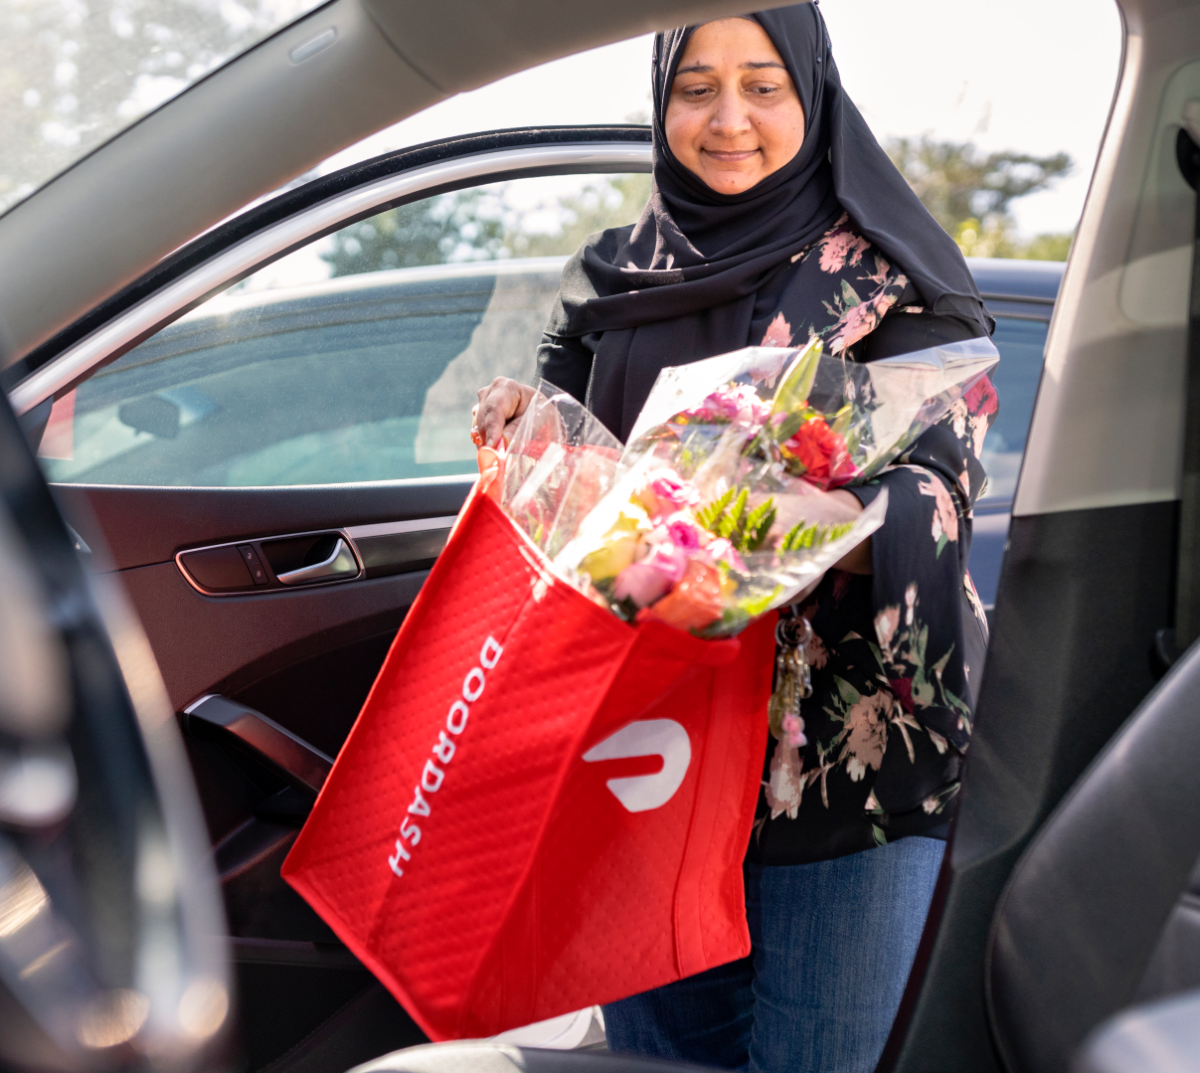 Woman exiting car with DoorDash bag of flowers